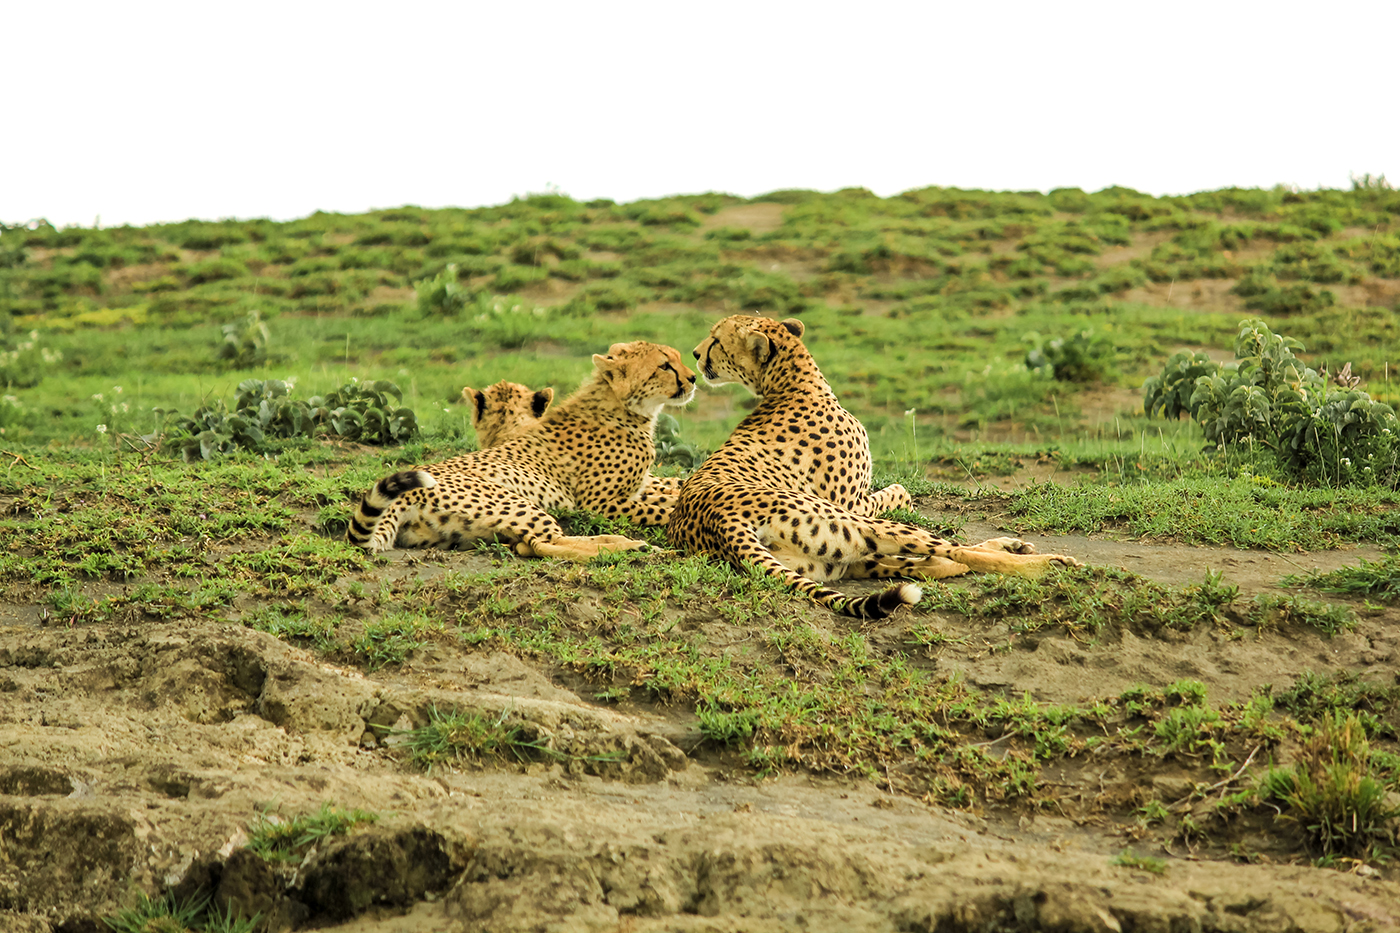 Two young cheetahs with their mother in Tarangire National Park, Tanzania Africa.